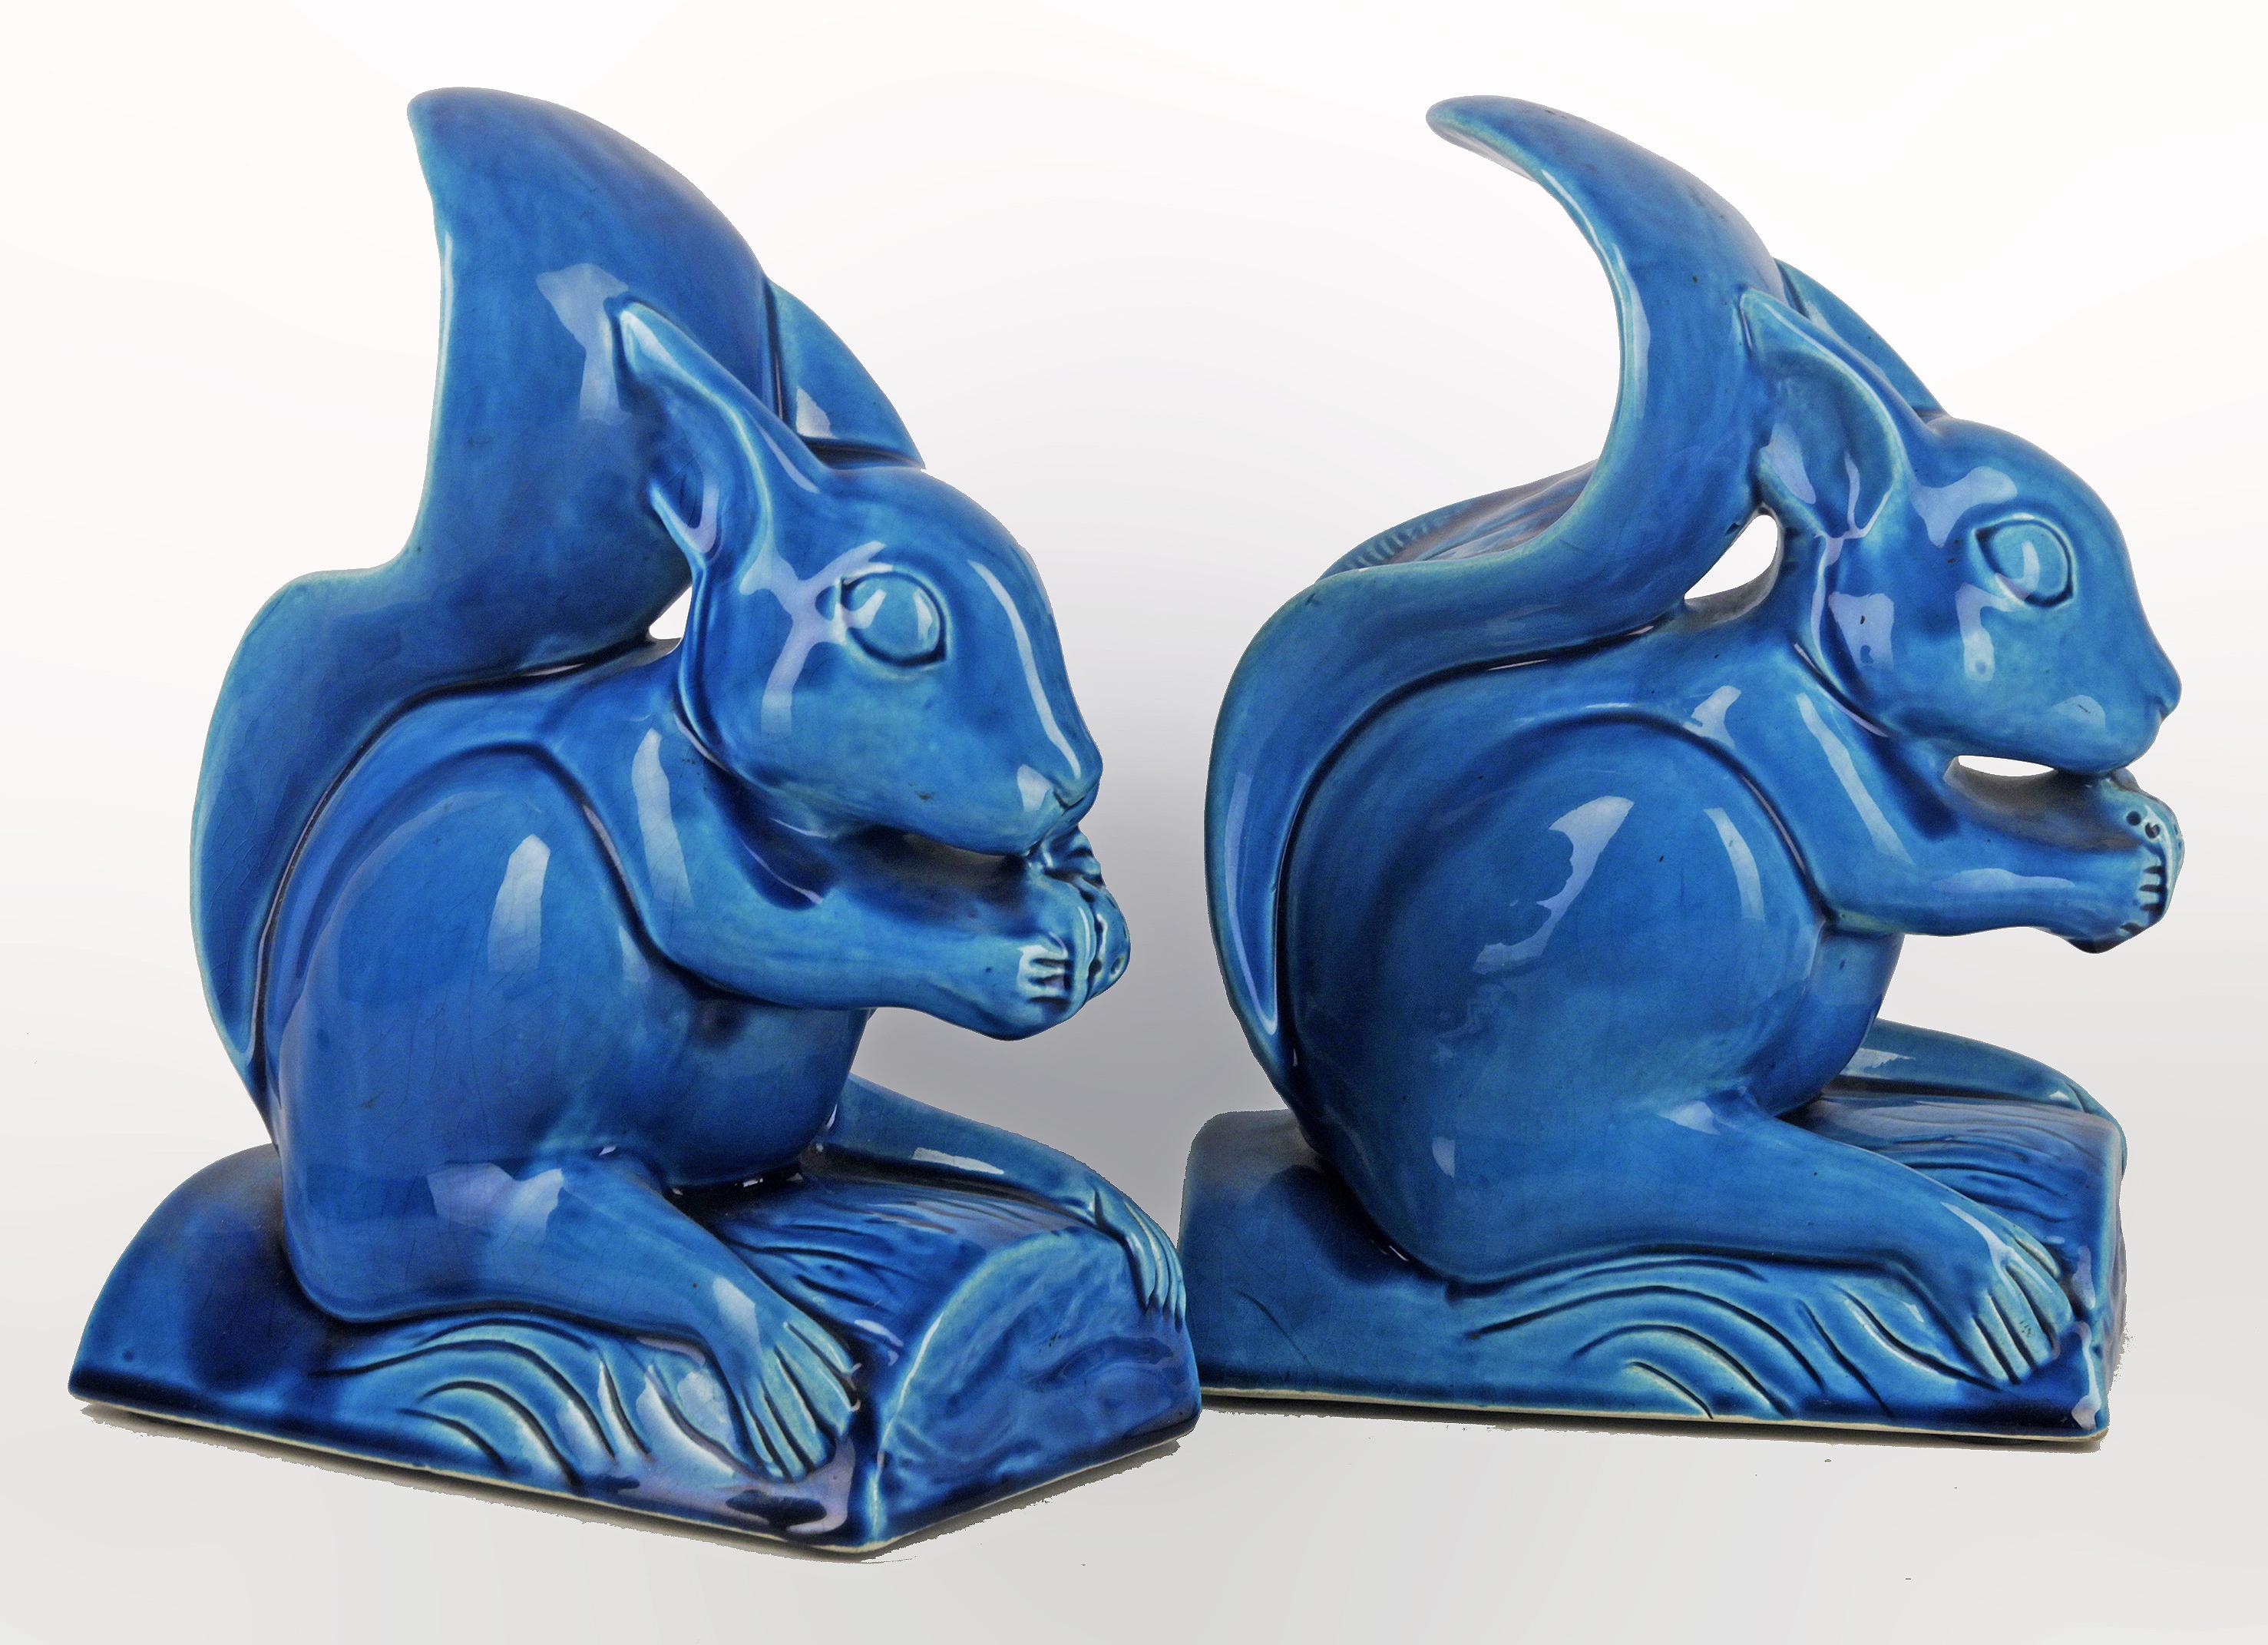 Mid-Century Modern Set of Mid-20th Century Chinese Glazed Blue Ceramic Squirrel Sculptures/Bookends